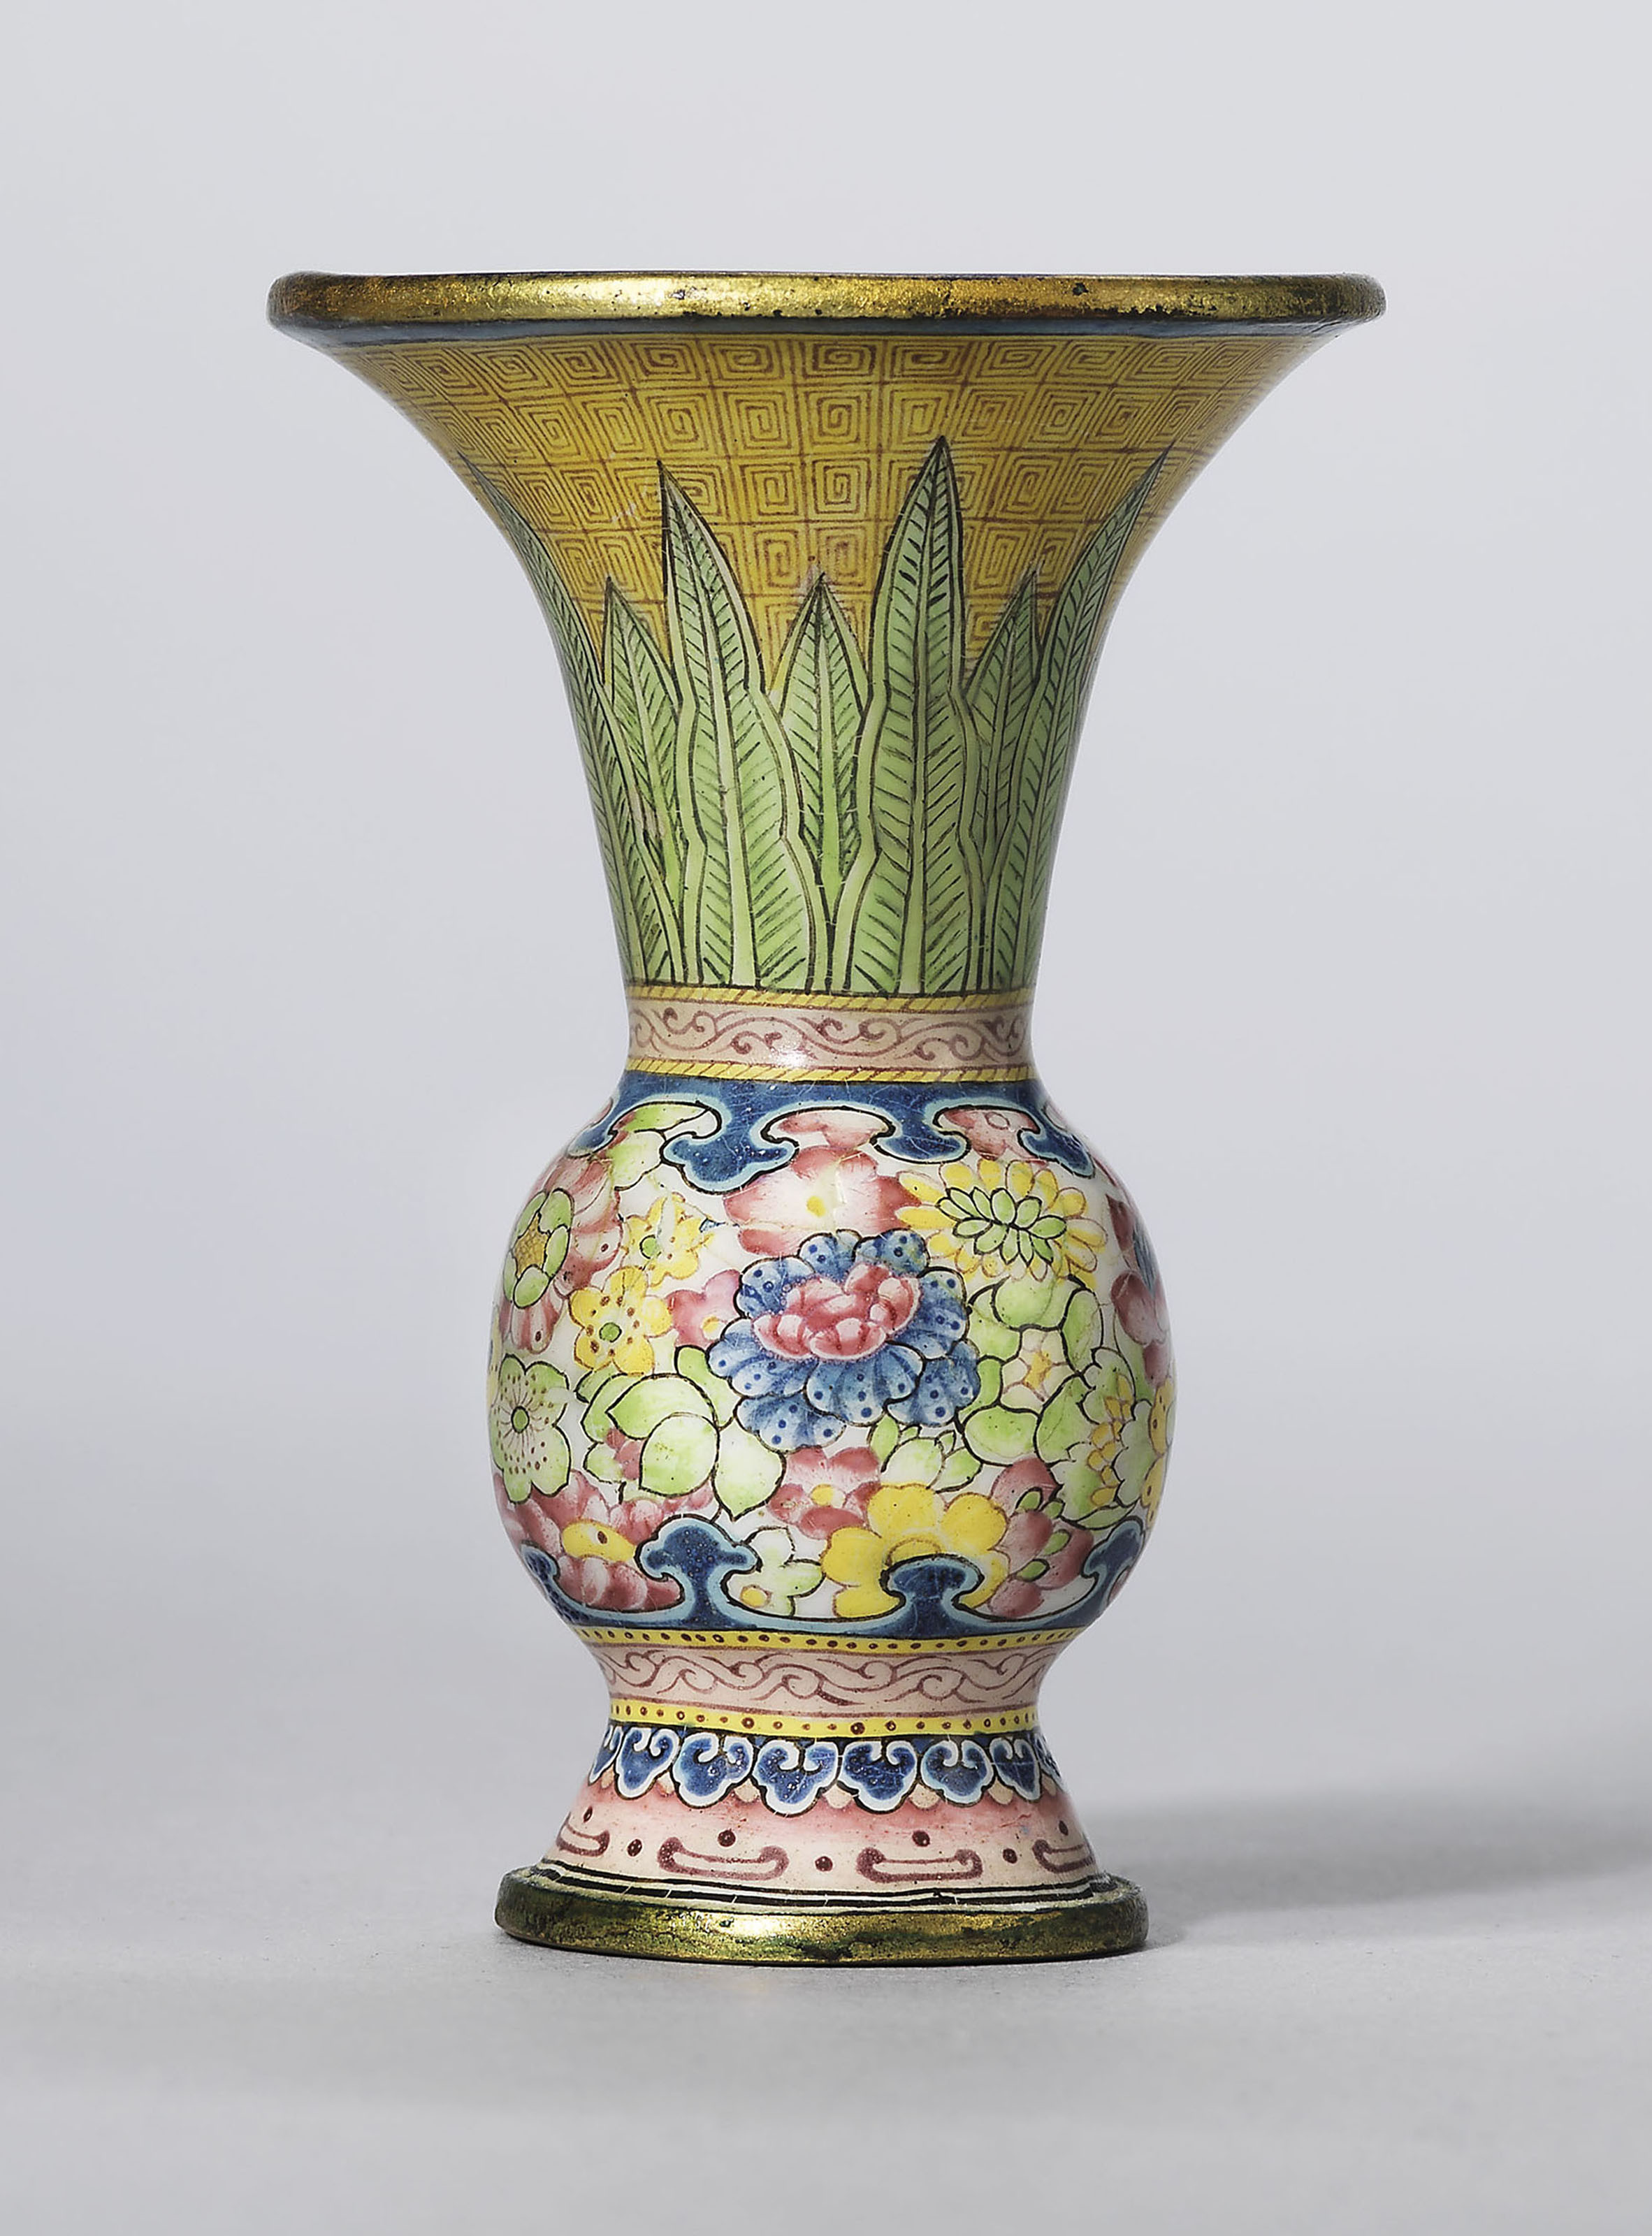 16 Cute Fine China Vase Made In Japan 2024 free download fine china vase made in japan of a guide to the symbolism of flowers on chinese ceramics christies intended for a rare painted enamel gu shaped miniature vase qianlong four character mark in